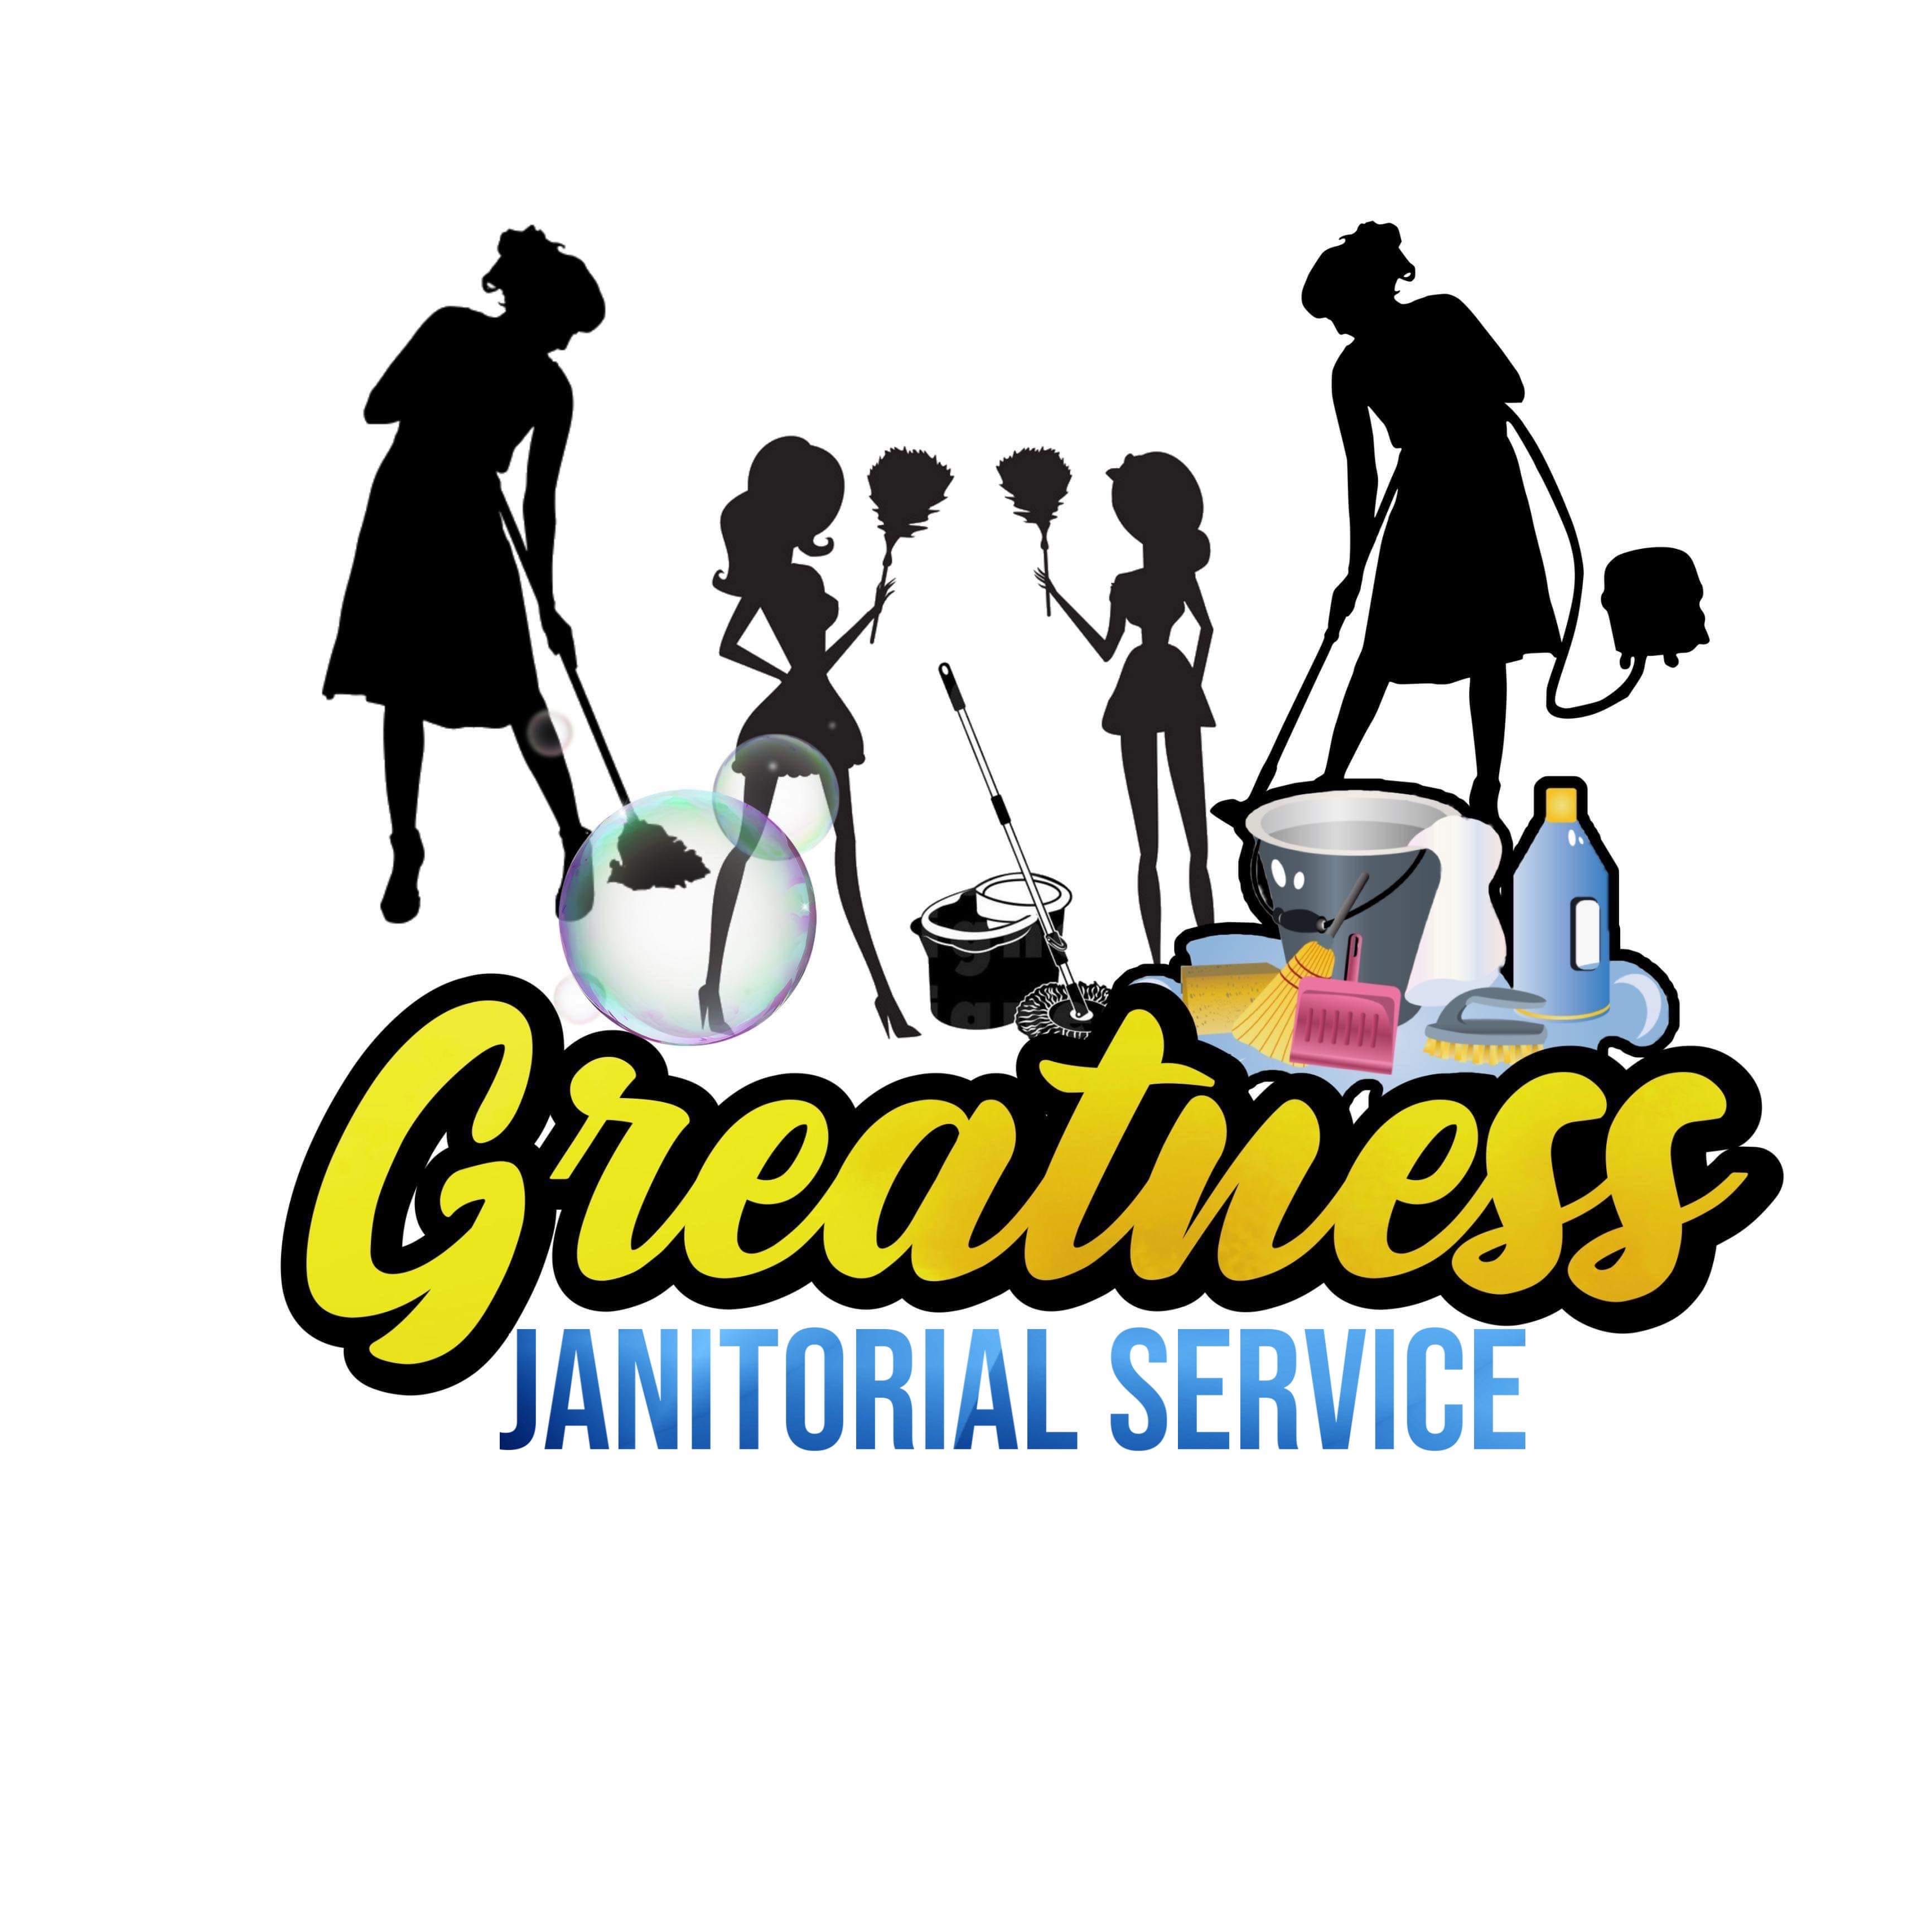 Greatness Janitorial Service